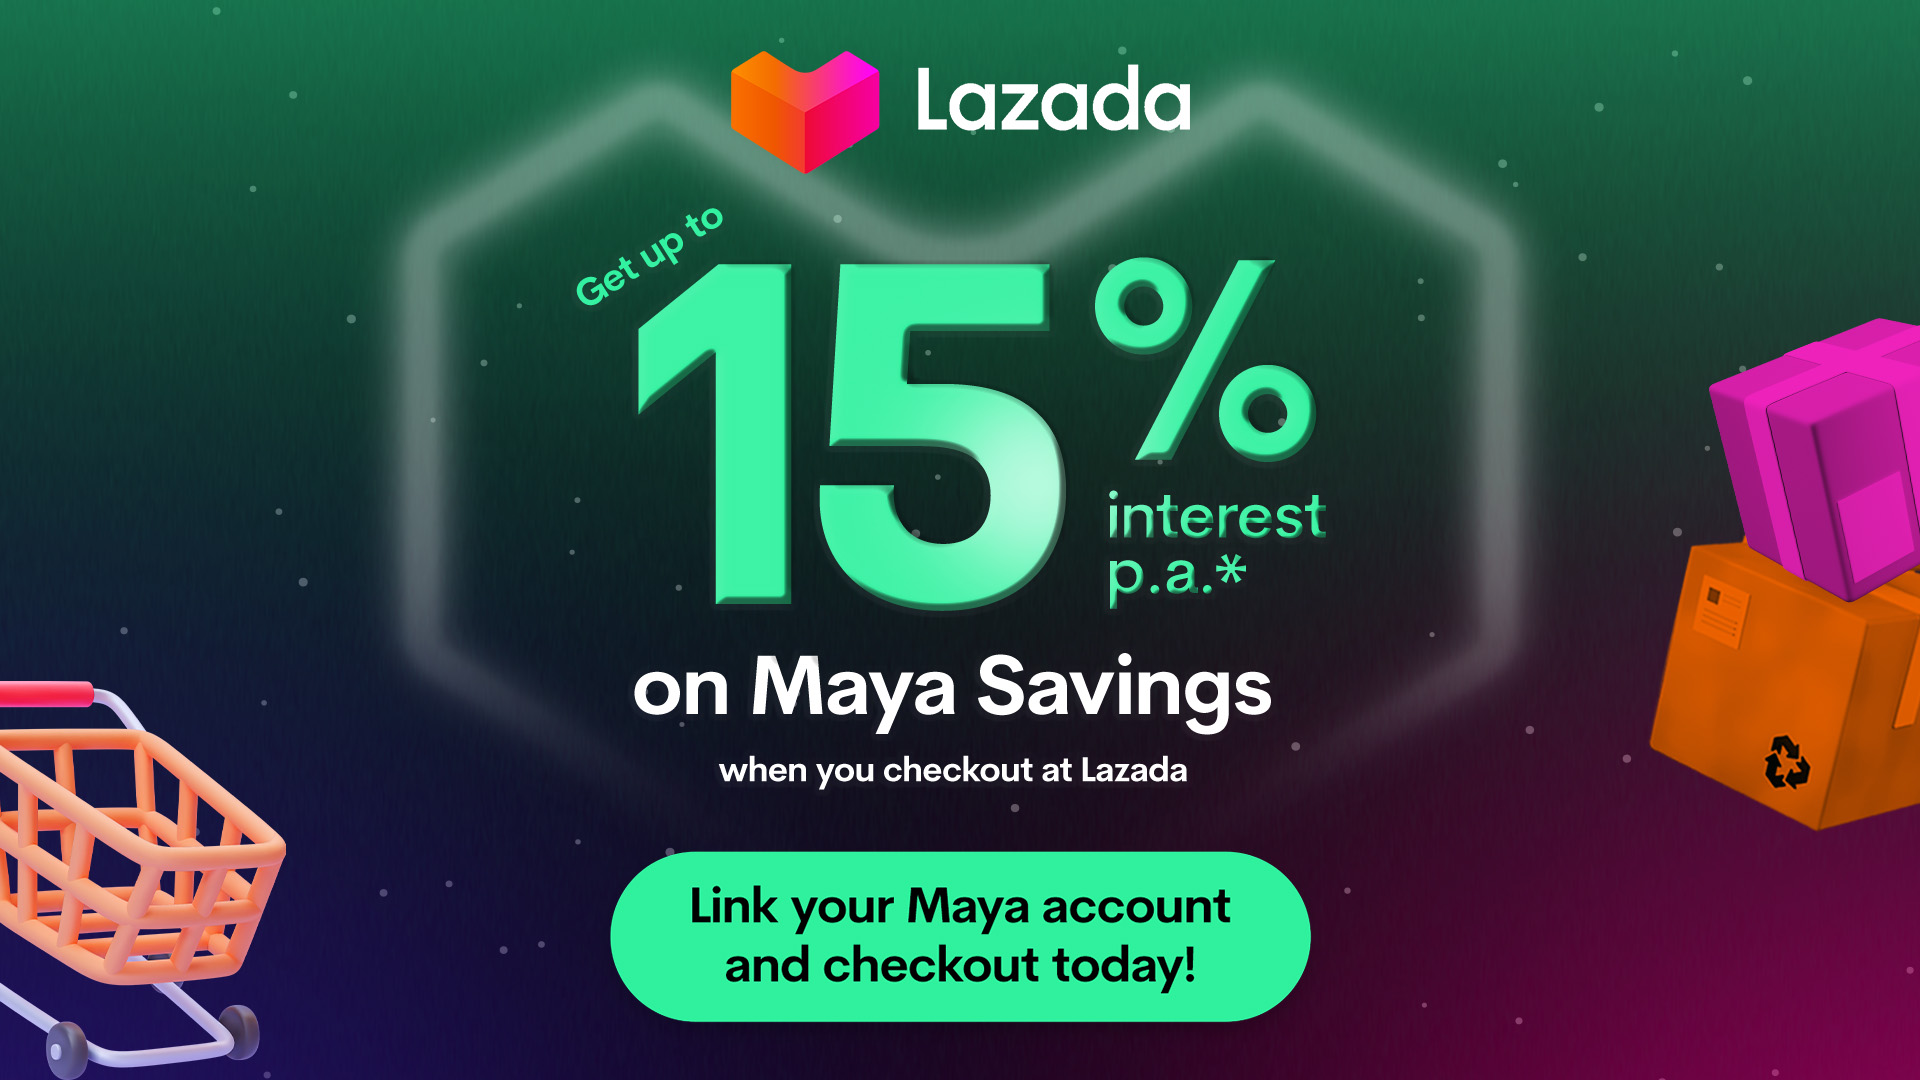 Boost your Maya Savings with +1% interest p.a. when you shop at Lazada